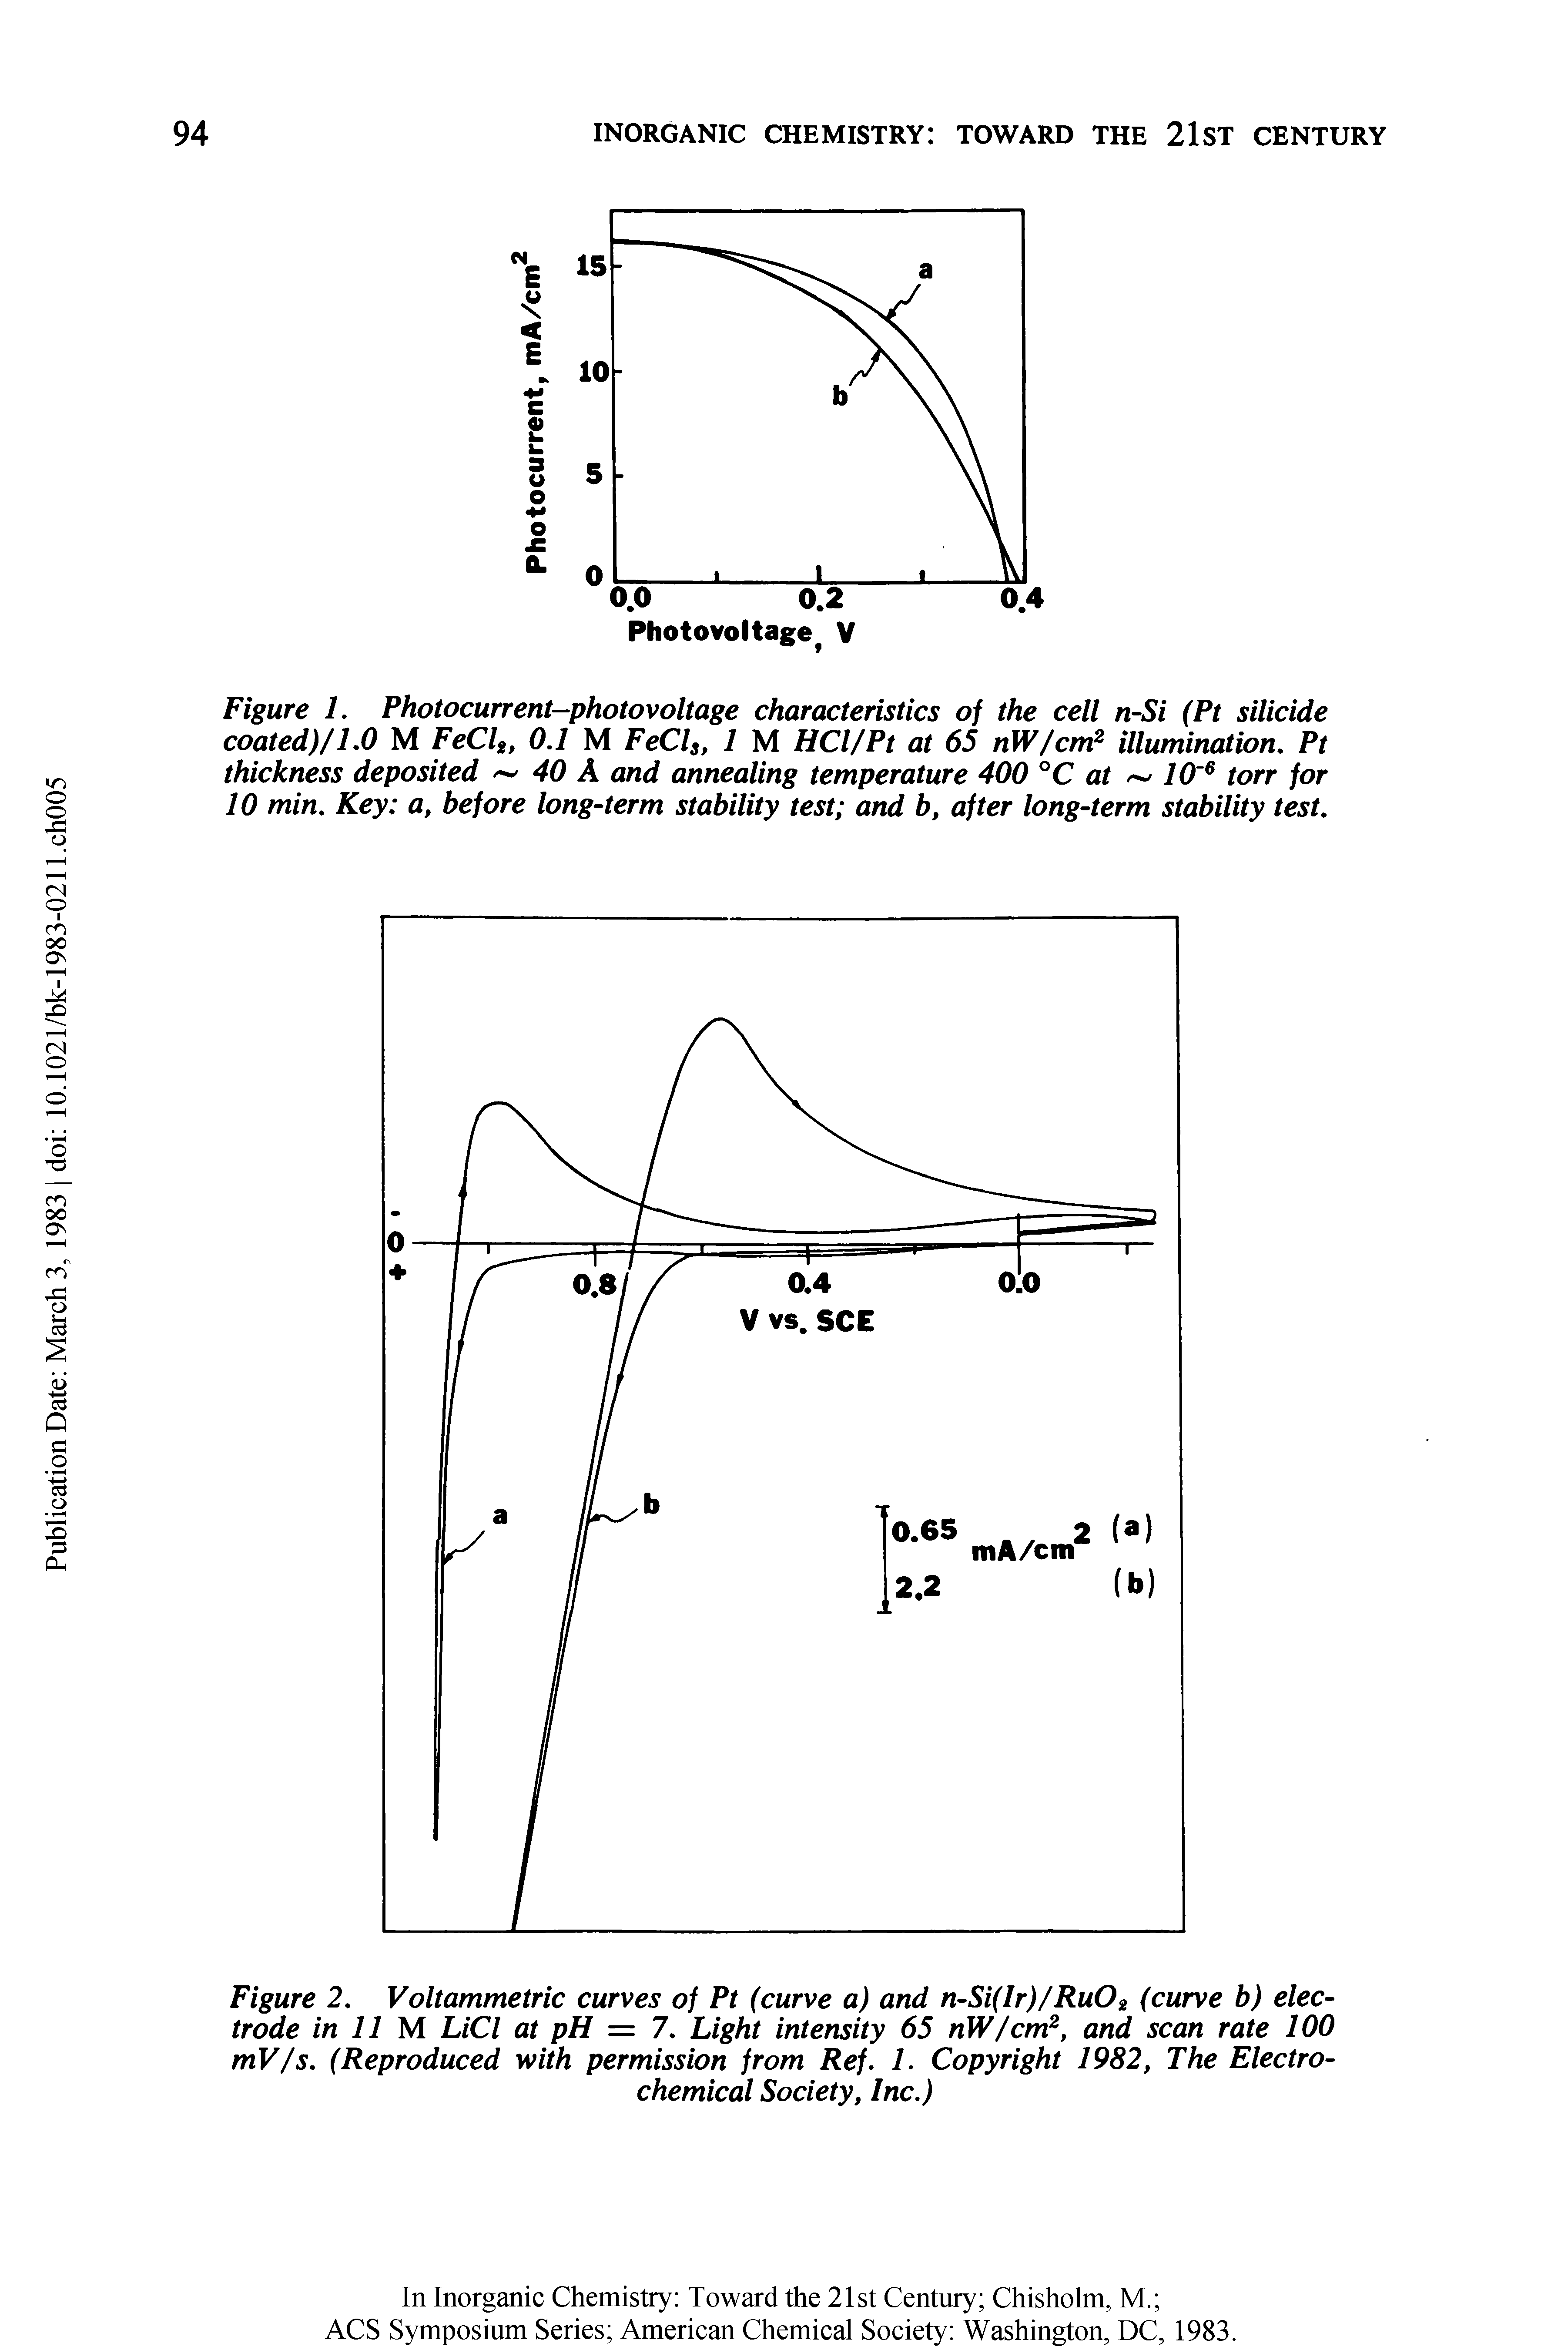 Figure 1. Photocurrent-photovoltage characteristics of the cell n-Si (Pt silicide coated)/1.0 M FeClg, 0.1 M FeCU, 1 M HCl/Pt at 65 nW/cm2 illumination. Pt thickness deposited 40 A and annealing temperature 400 °C at 10 6 torr for 10 min. Key a, before long-term stability test and b, after long-term stability test.